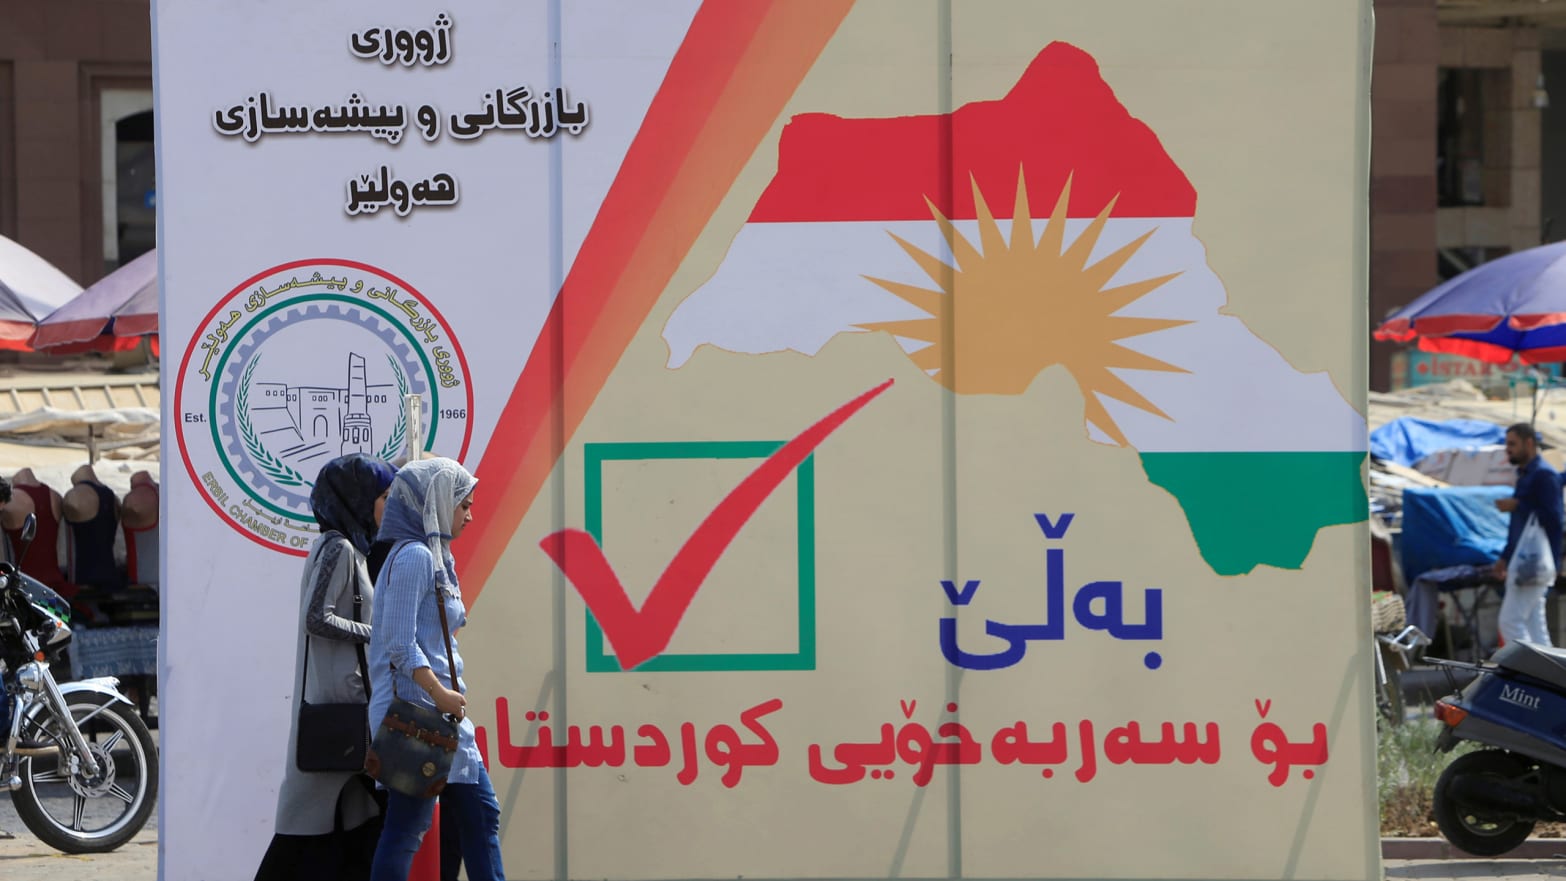 The referendum for independence for Kurdistan in Erbil, Iraq